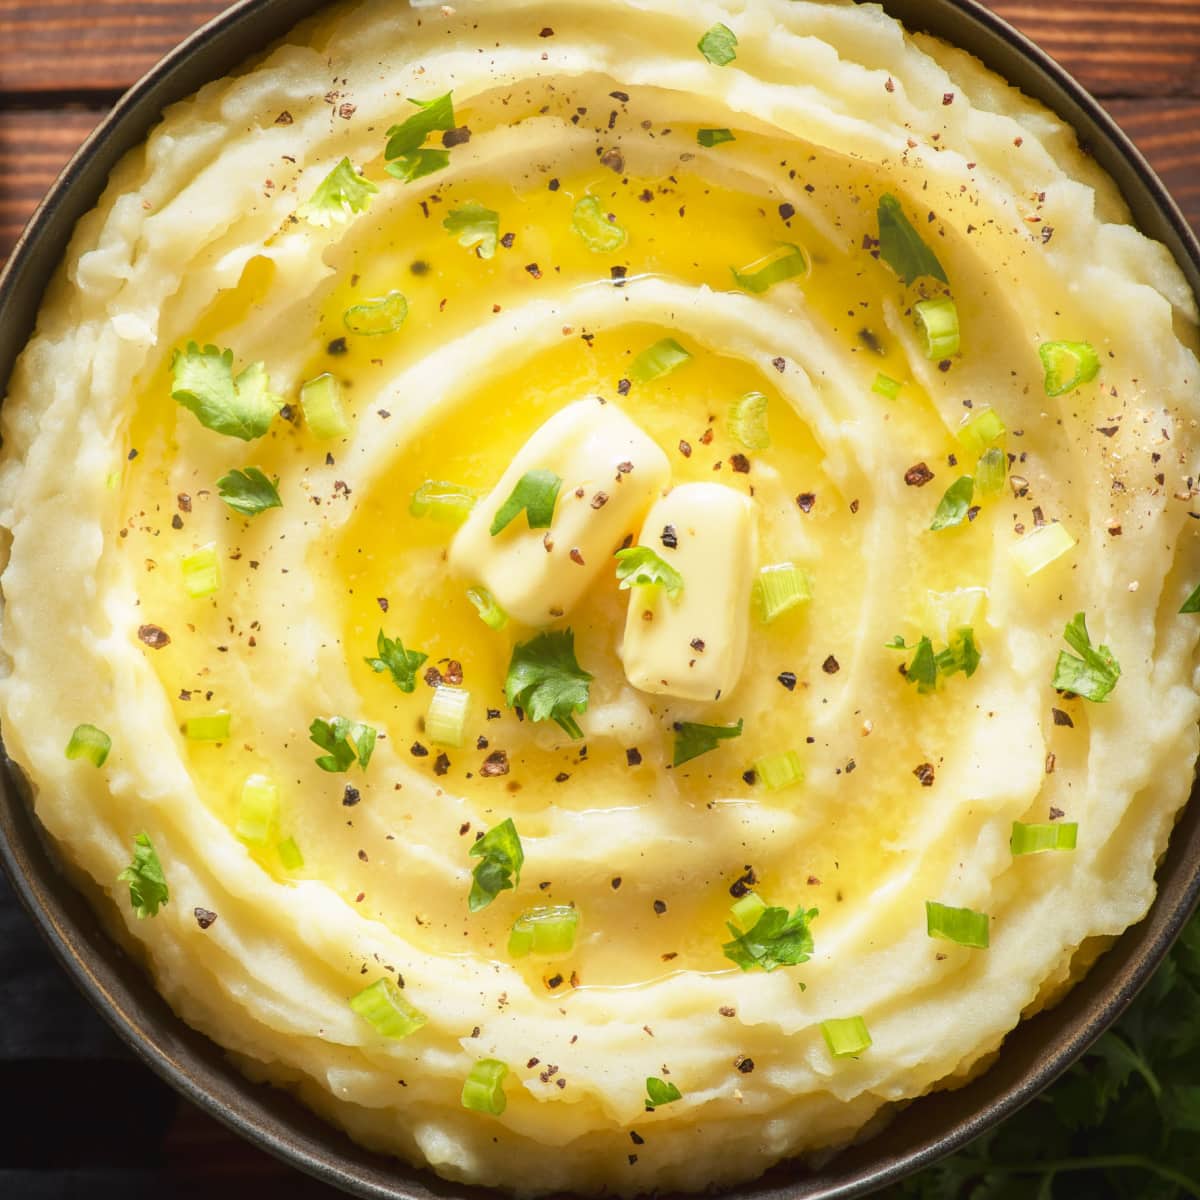 Bowl of Mashed Potatoes with Butter and Spices